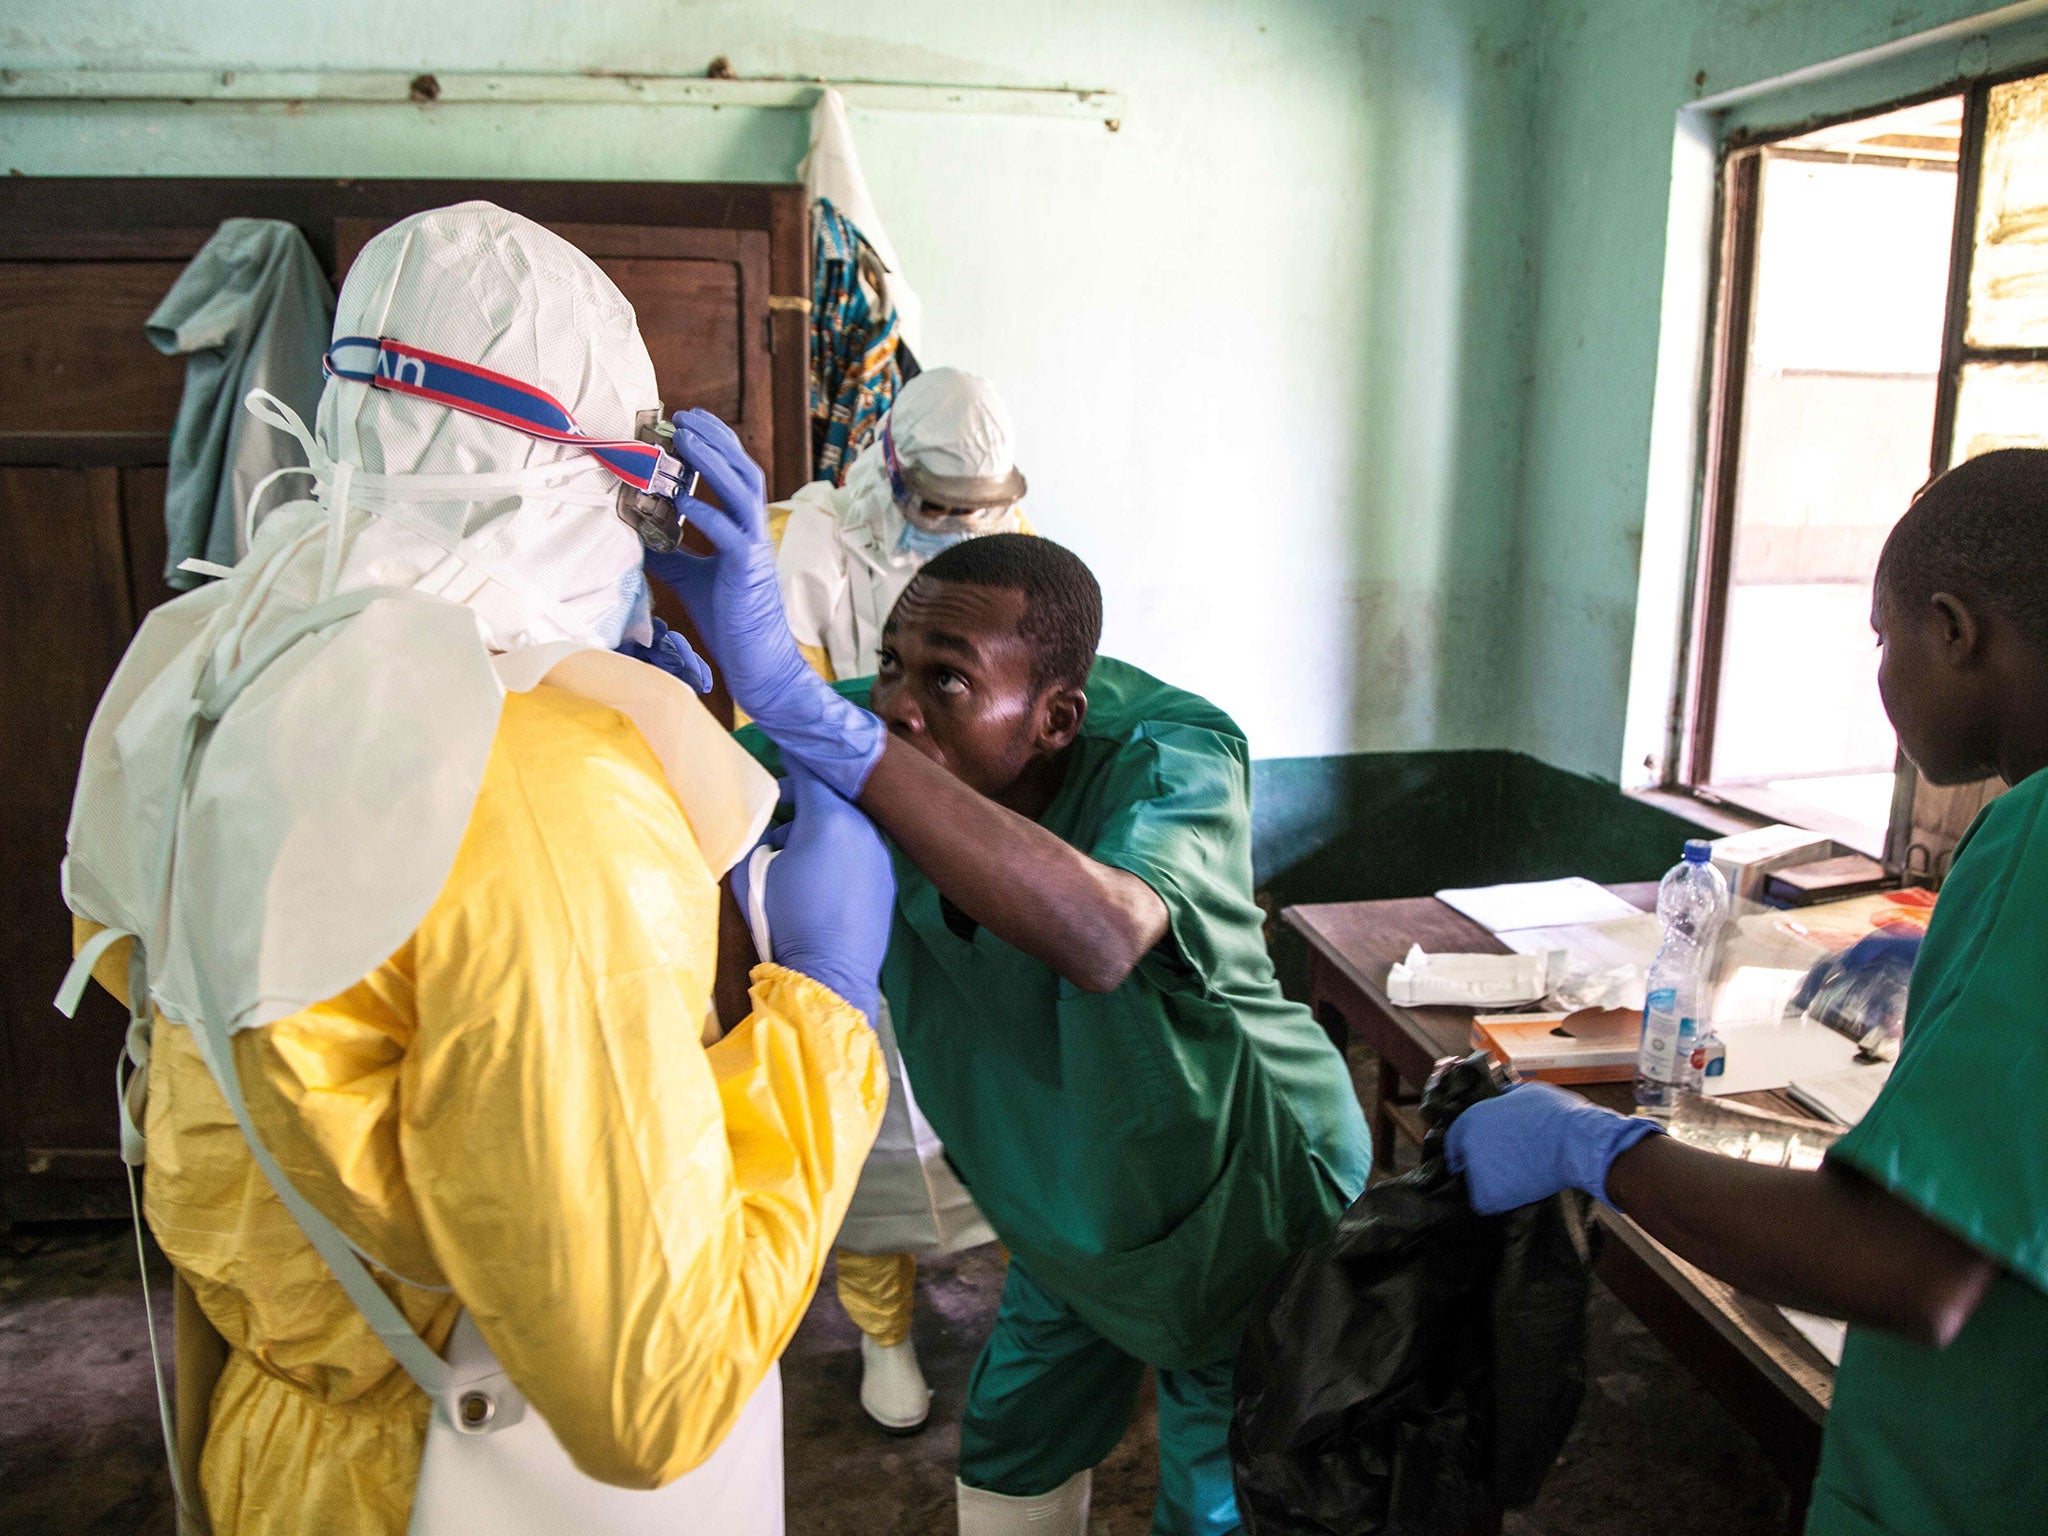 Health workers wear protective equipment as they prepare see suspected Ebola patients at Bikoro Hospital